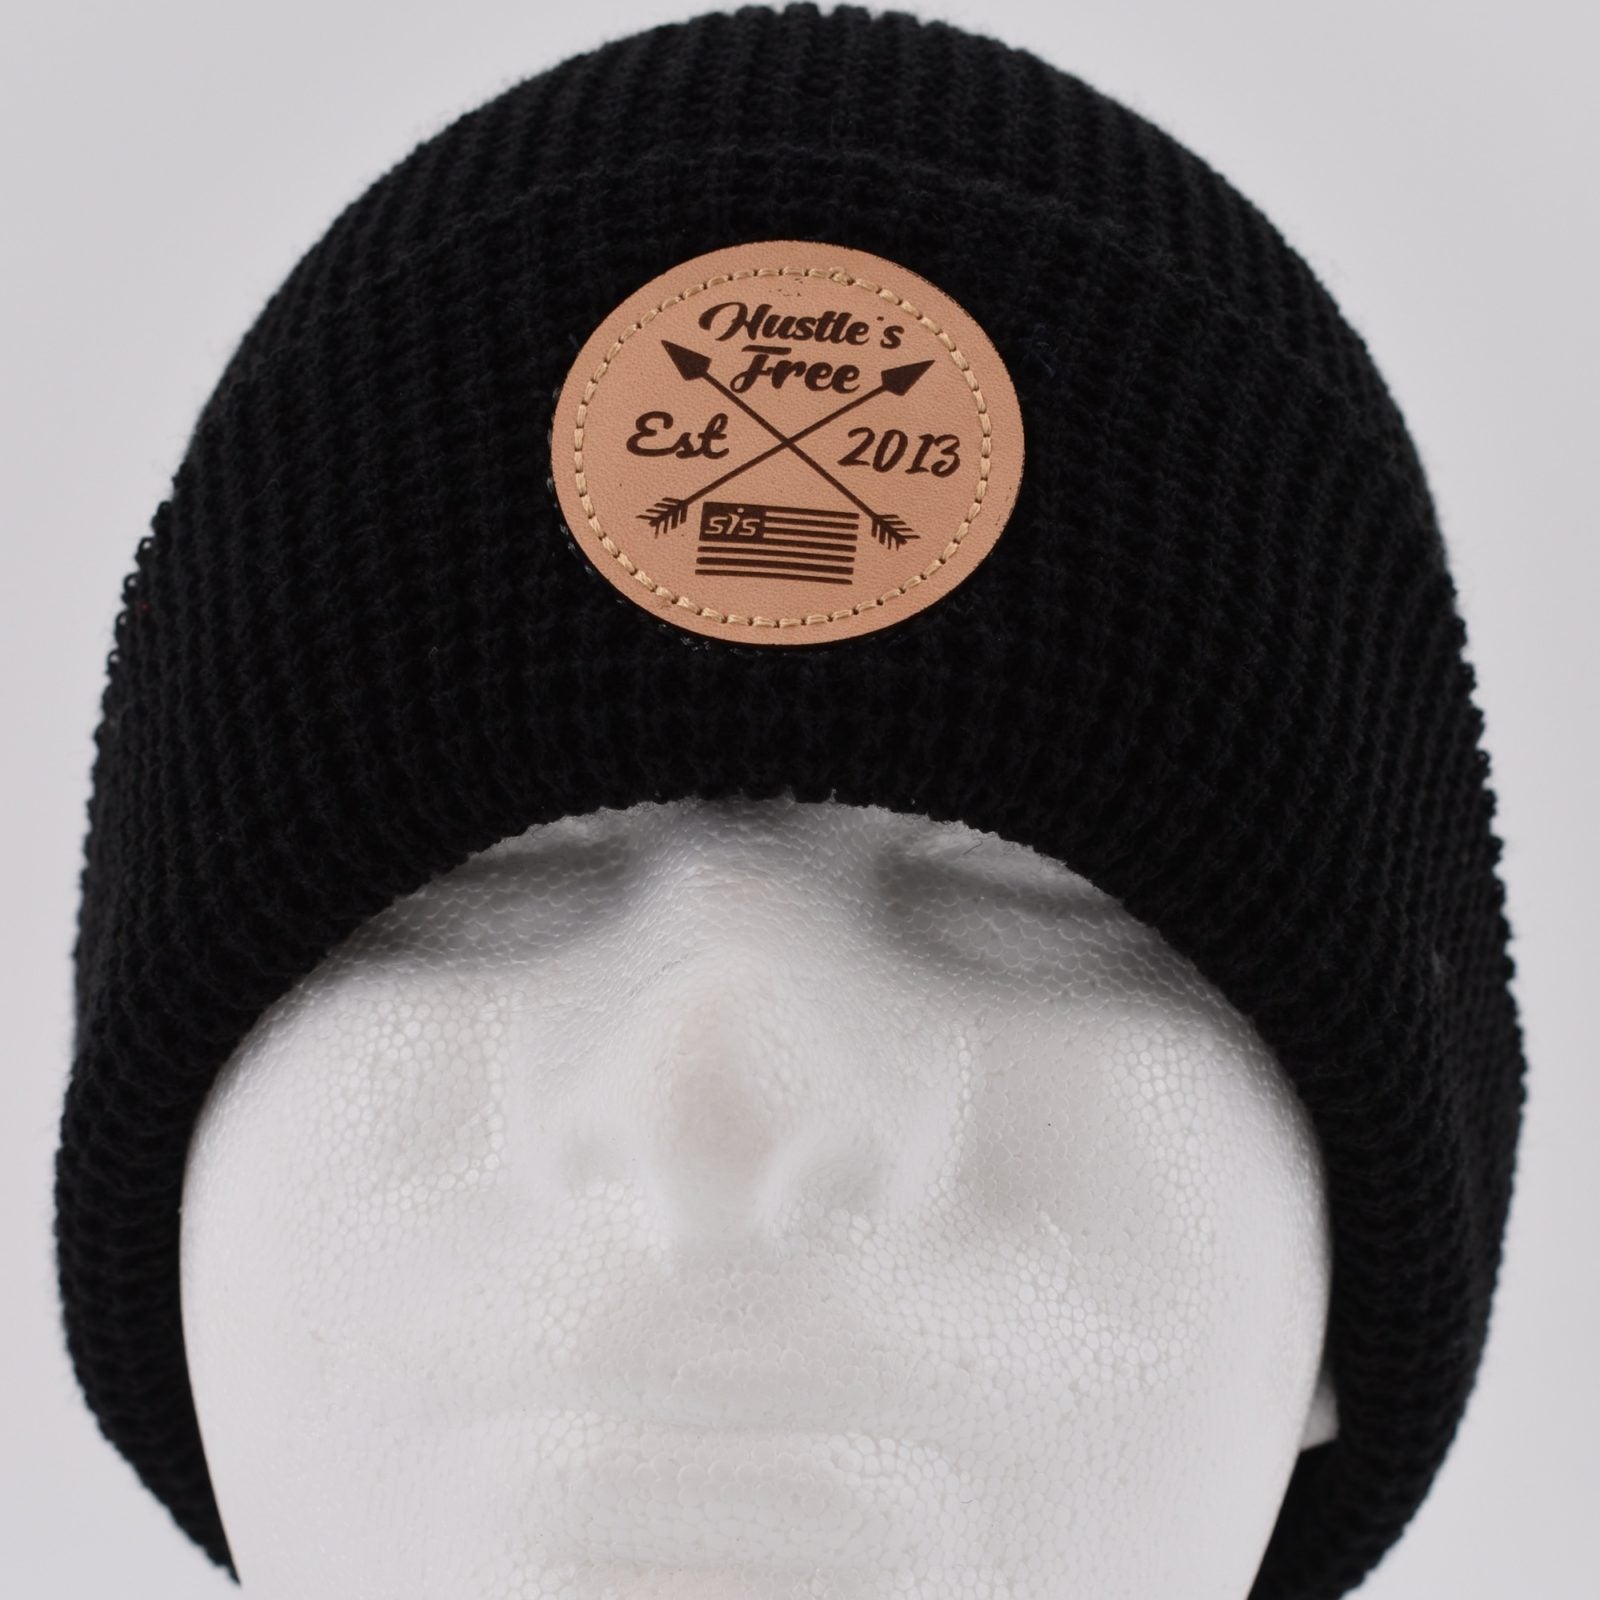 Miken Streetwear Snapback Hat- 255 All Black/Miken M and Text Leather Patch